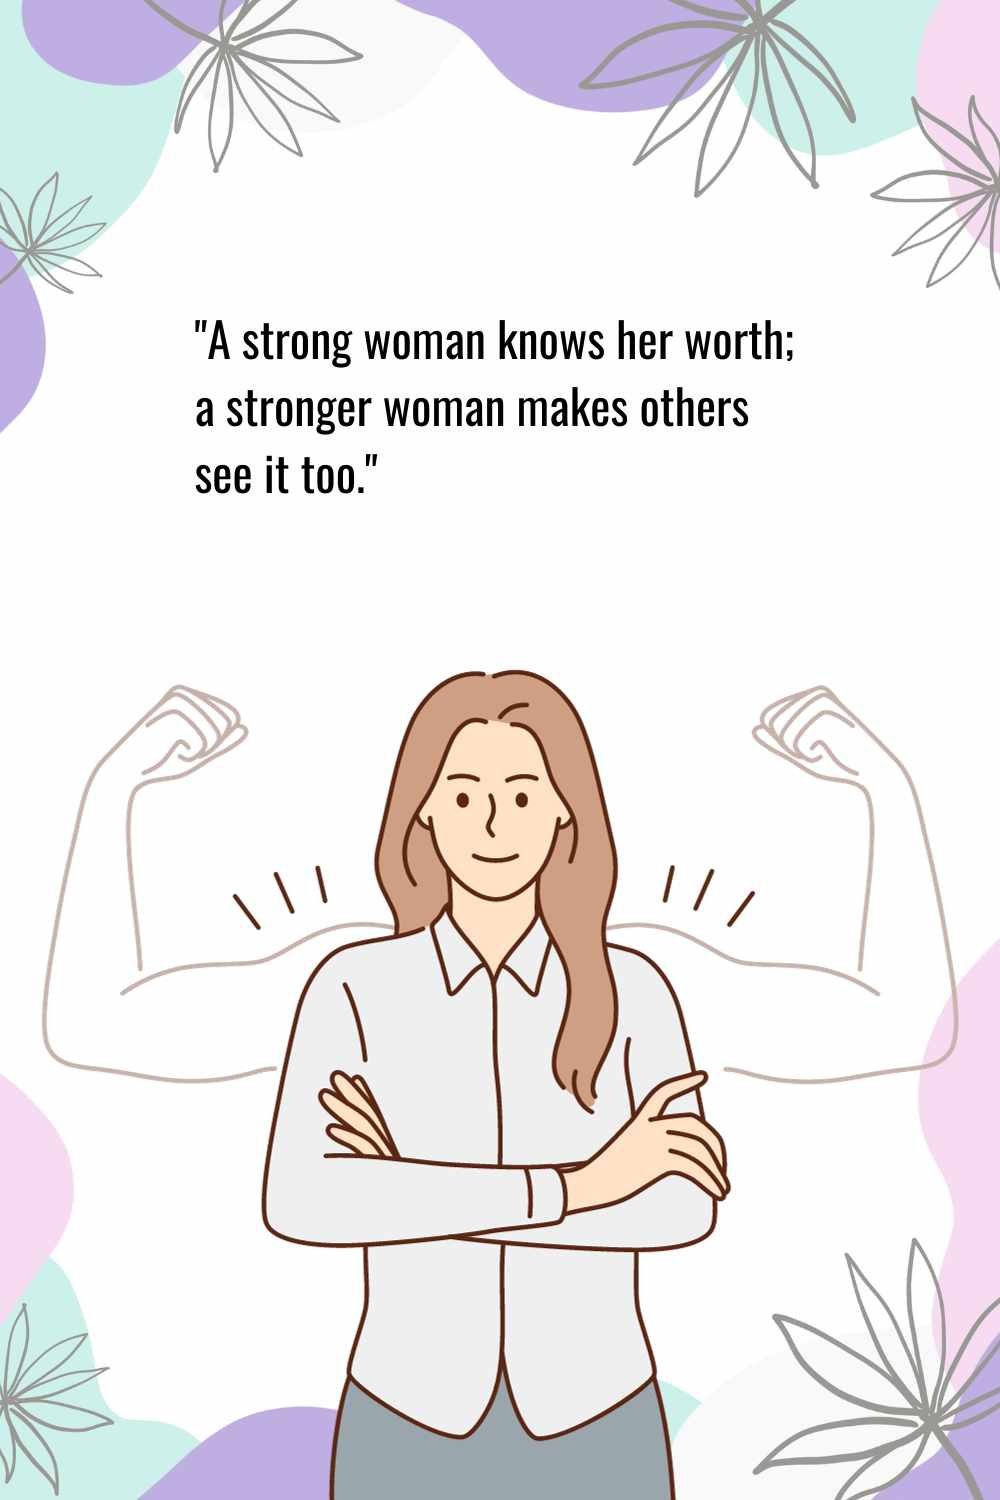 Short inspiring women worth quotes with image